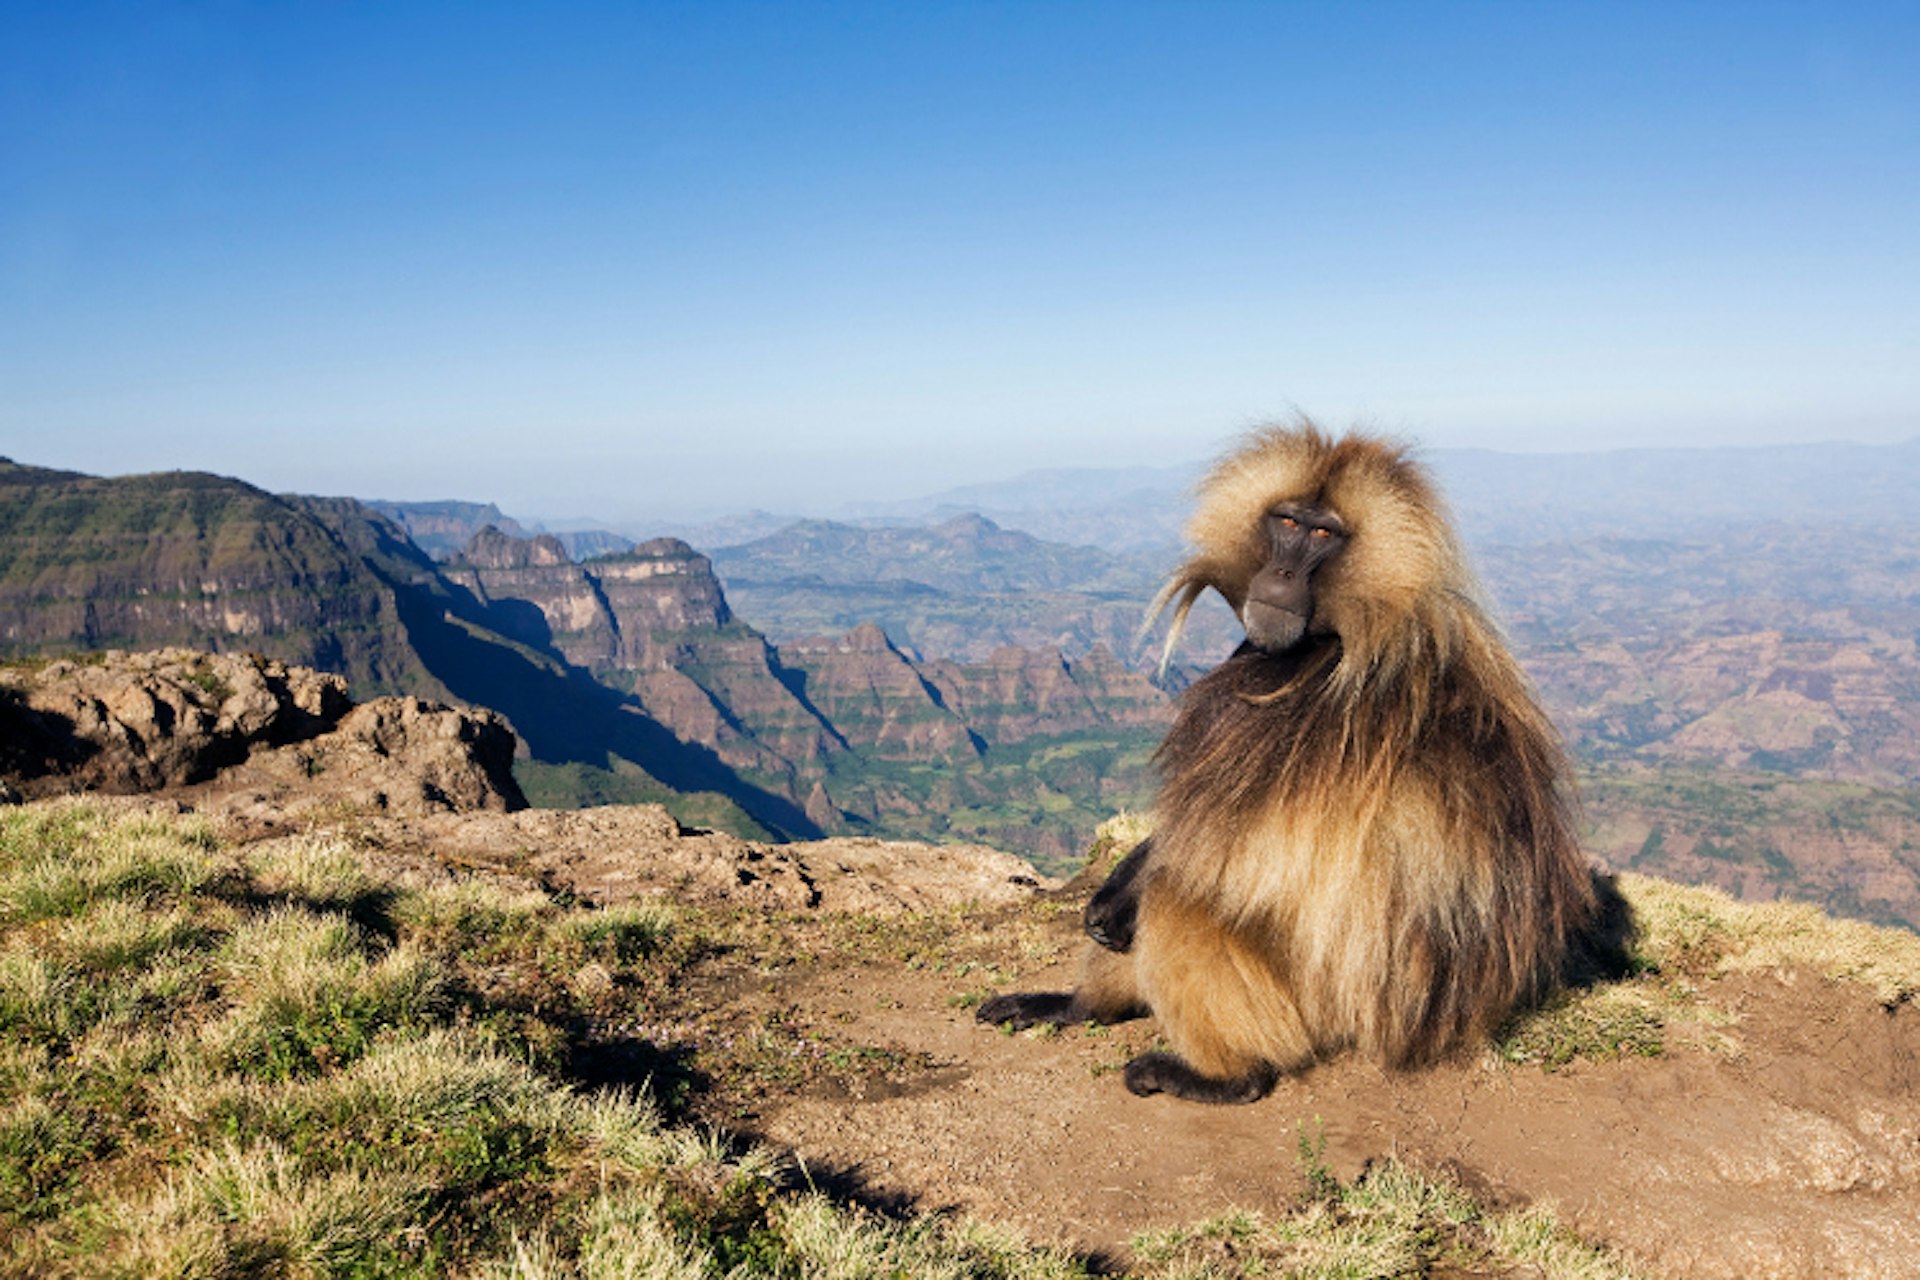 A gelada monkey admires the view of the Simien Mountains. Image by Anup Shah / The Image Bank / Getty